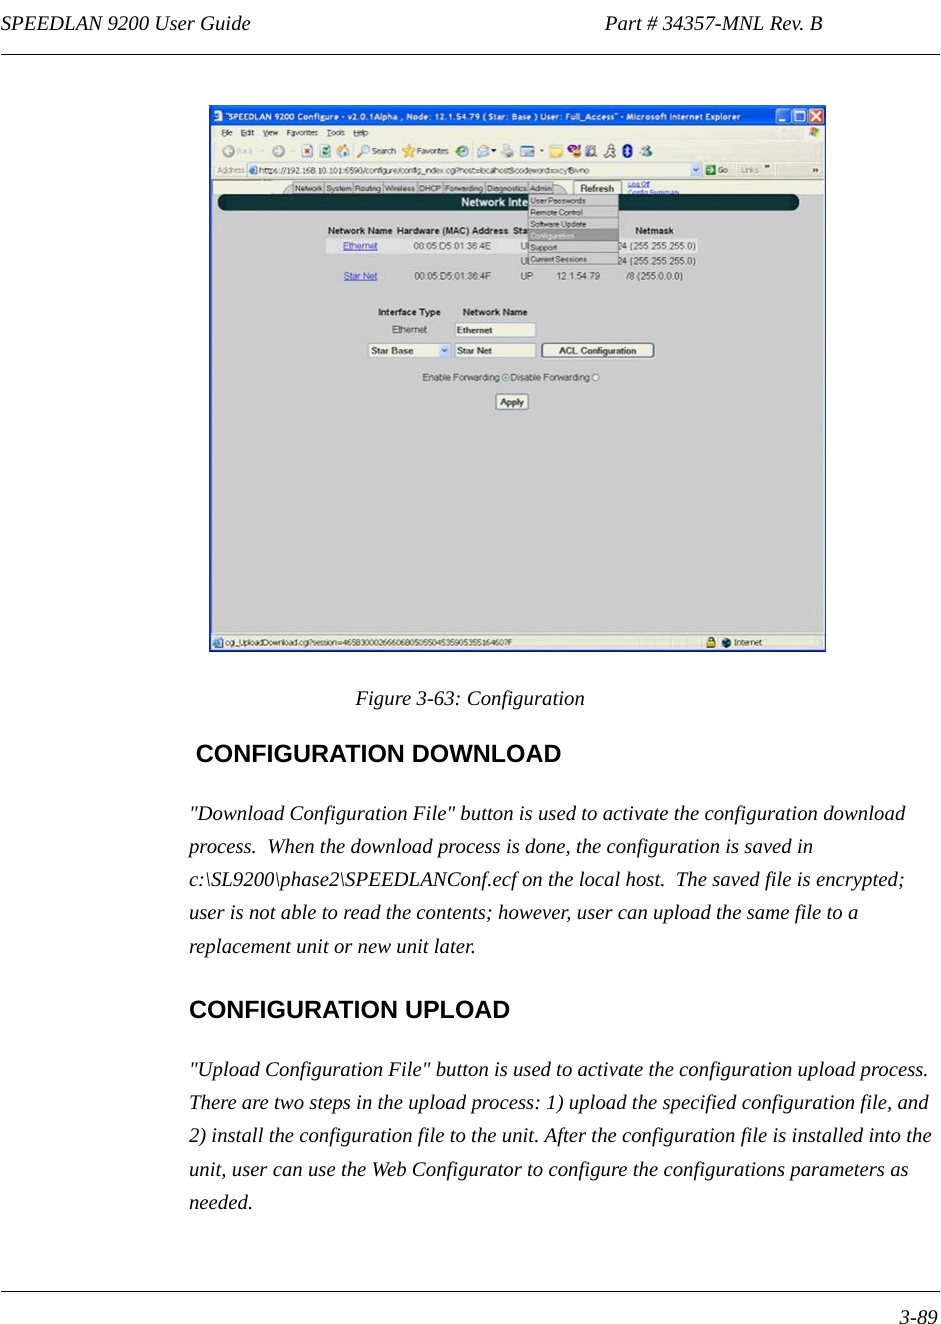 SPEEDLAN 9200 User Guide                                                                    Part # 34357-MNL Rev. B      3-89                                                                                                                                                              Figure 3-63: Configuration CONFIGURATION DOWNLOAD&quot;Download Configuration File&quot; button is used to activate the configuration download process.  When the download process is done, the configuration is saved in c:\SL9200\phase2\SPEEDLANConf.ecf on the local host.  The saved file is encrypted; user is not able to read the contents; however, user can upload the same file to a replacement unit or new unit later.  CONFIGURATION UPLOAD&quot;Upload Configuration File&quot; button is used to activate the configuration upload process.  There are two steps in the upload process: 1) upload the specified configuration file, and 2) install the configuration file to the unit. After the configuration file is installed into the unit, user can use the Web Configurator to configure the configurations parameters as needed.